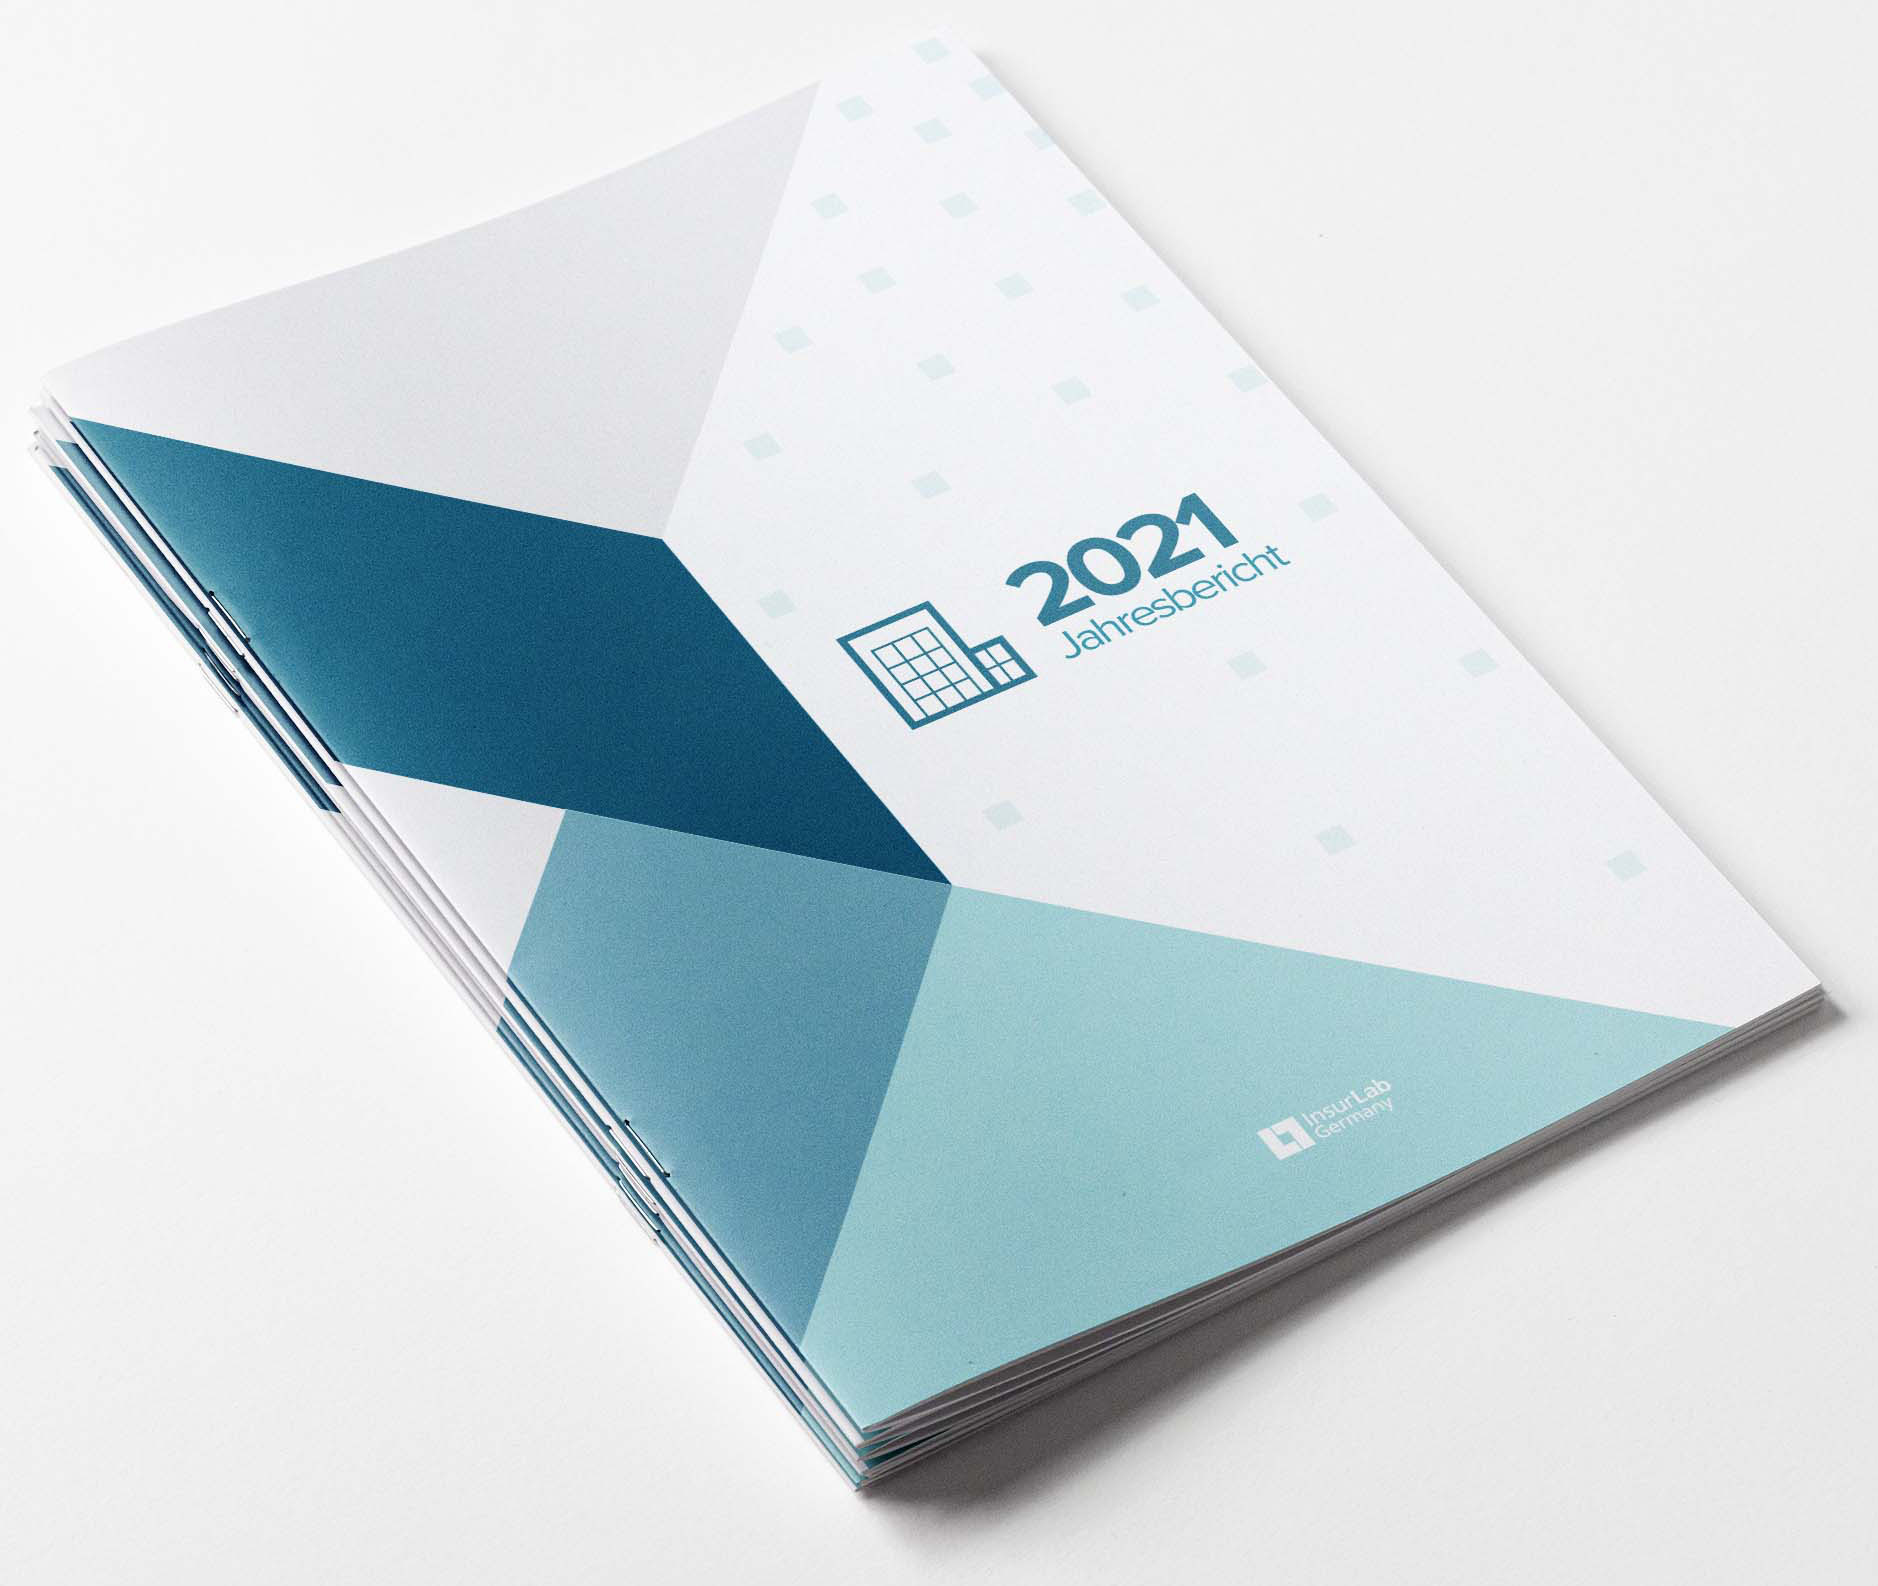 InsurLab Germany Annual Report 2021